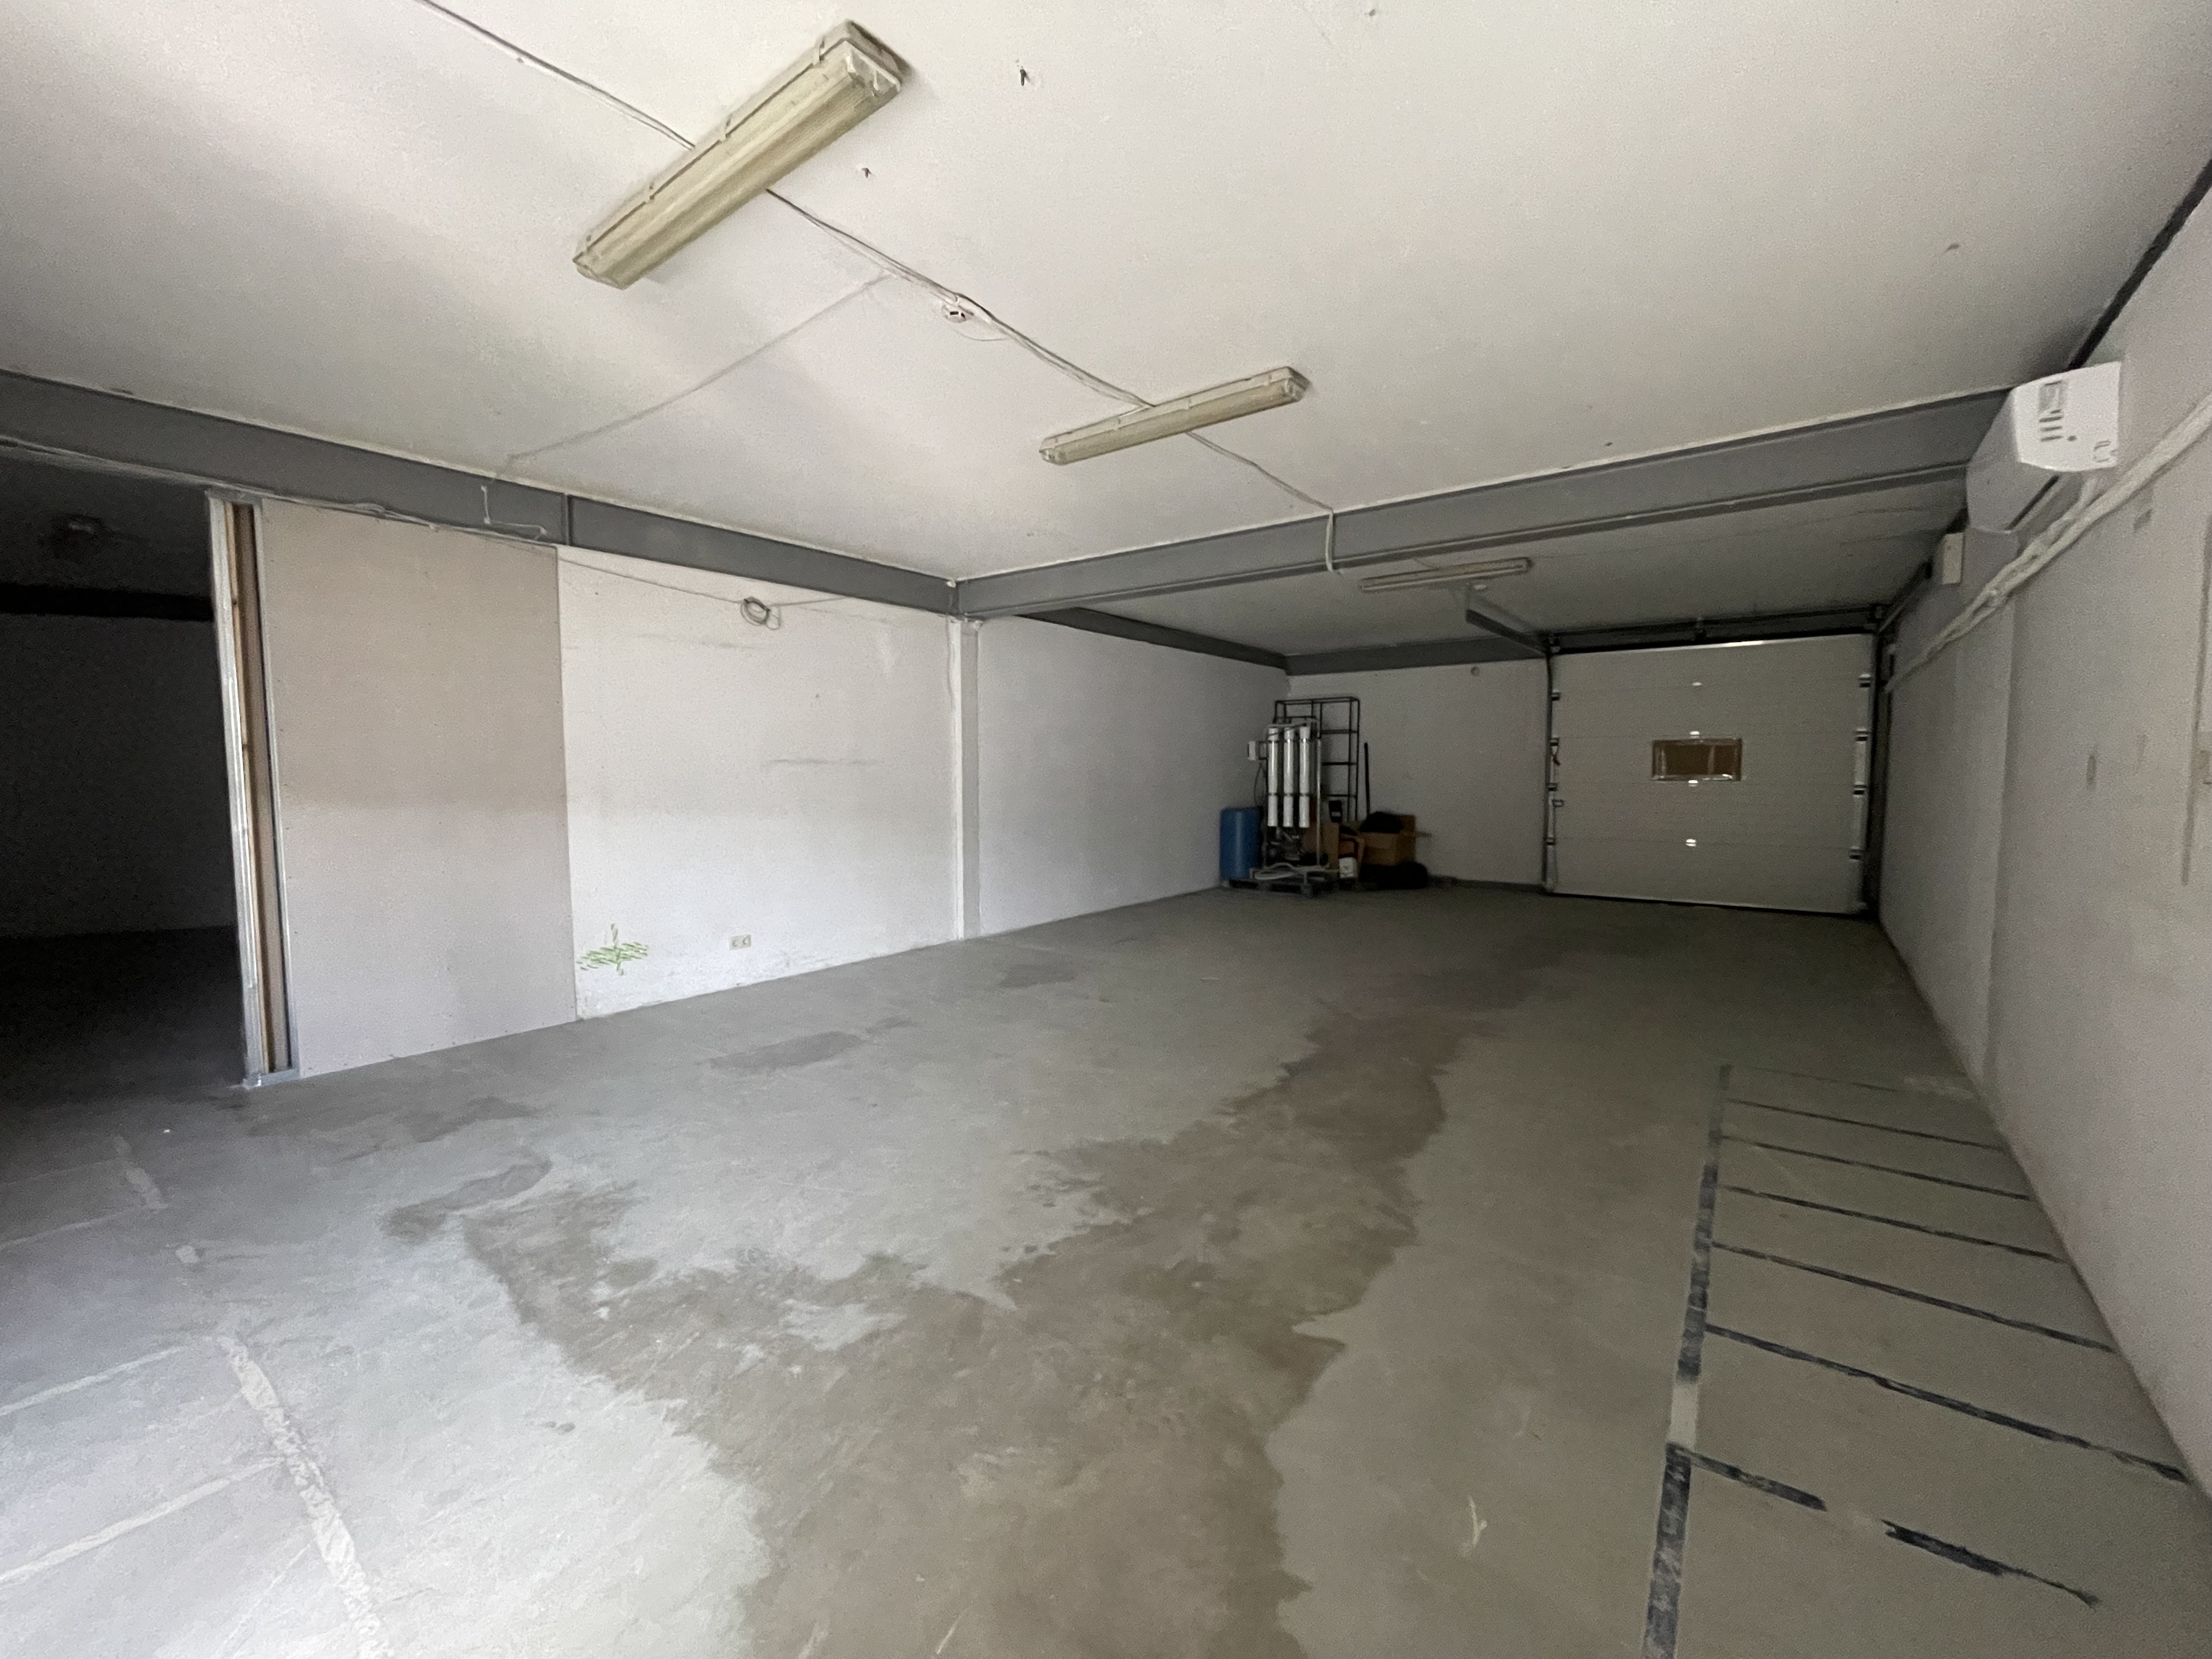 Warehouse for rent, Straupes street - Image 1